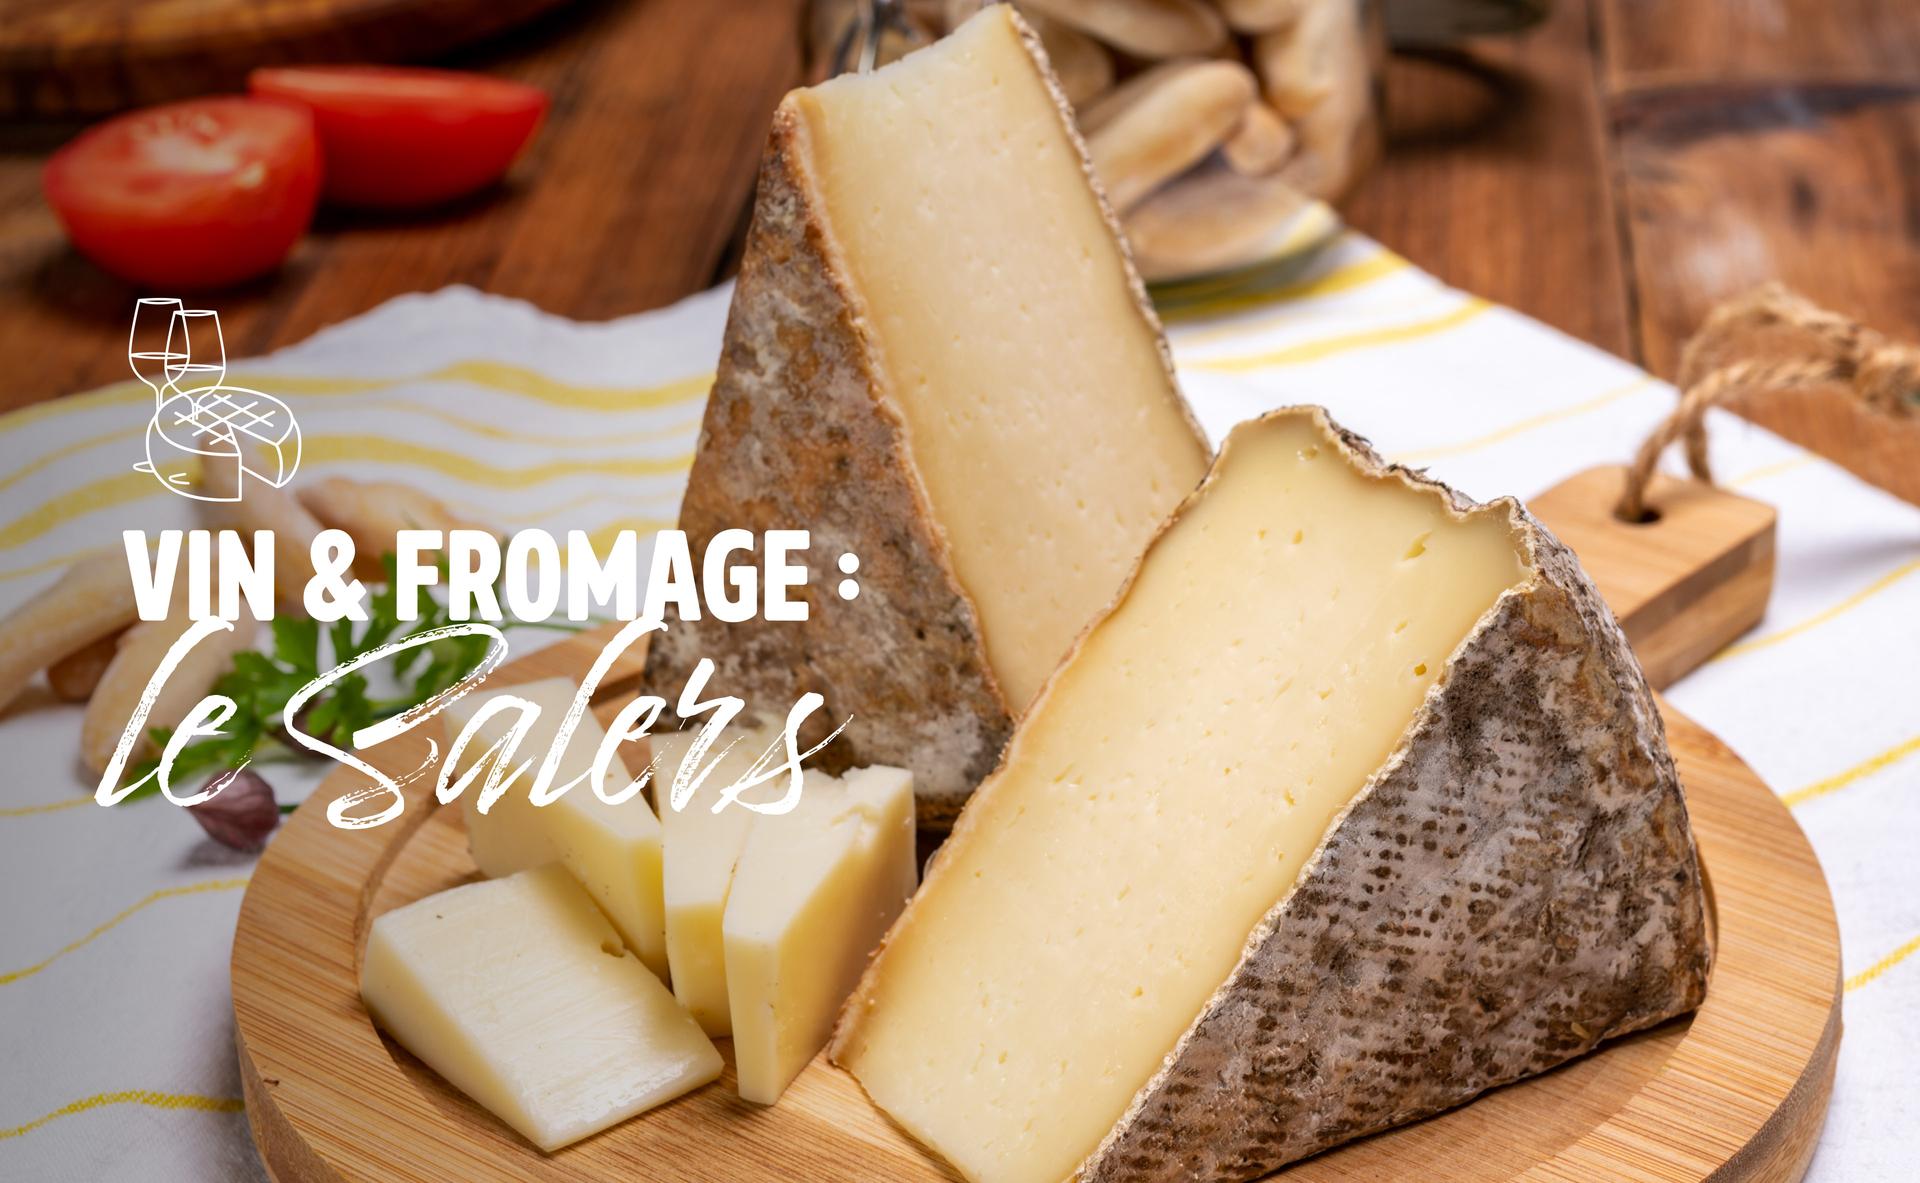 Vin & fromage : le Salers